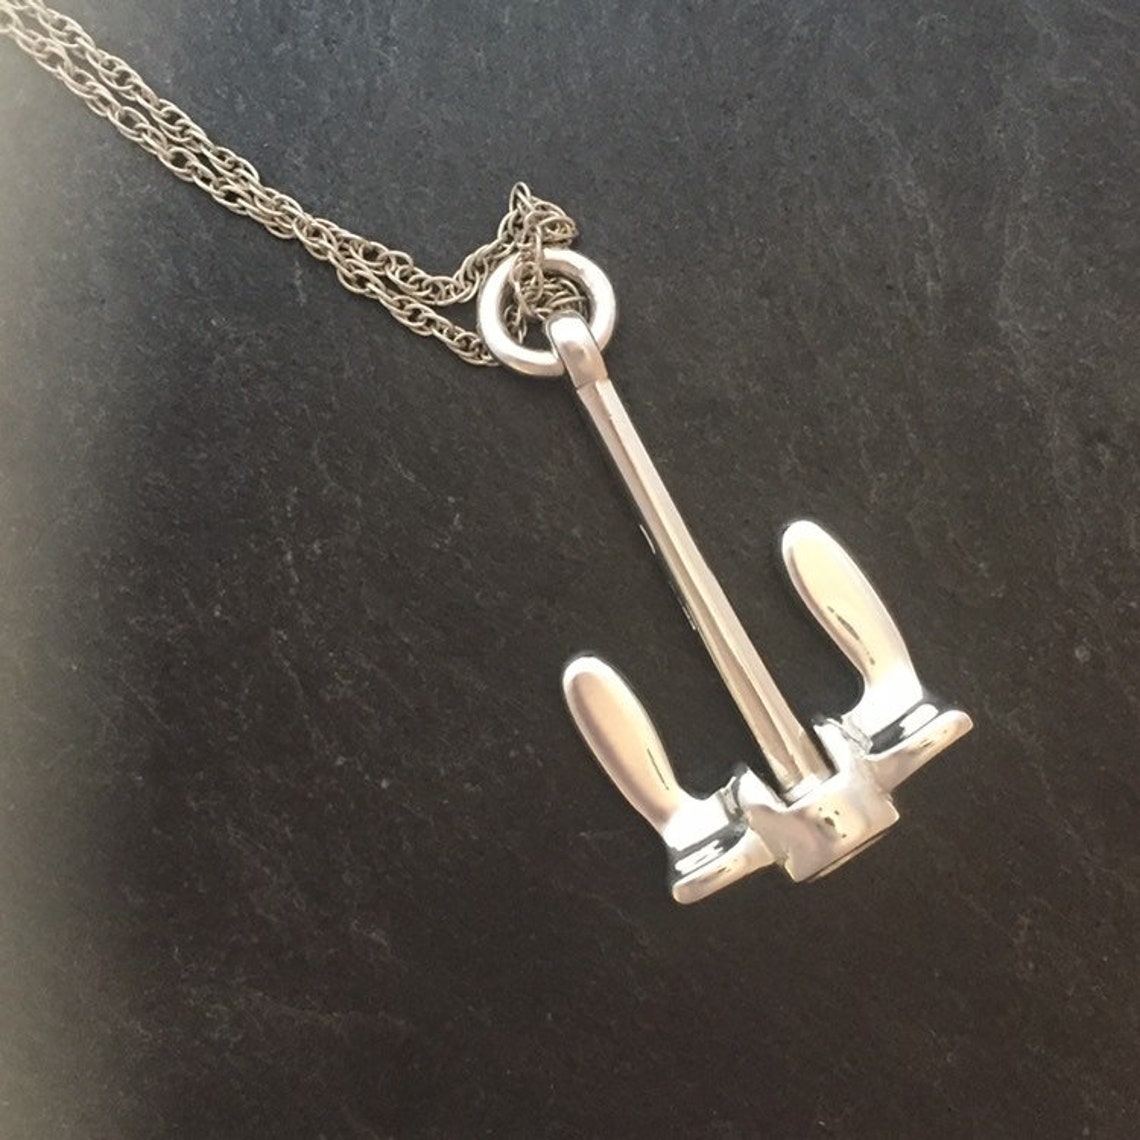 Navy stockless Anchor in Sterling Silver Necklace Pendant | Etsy